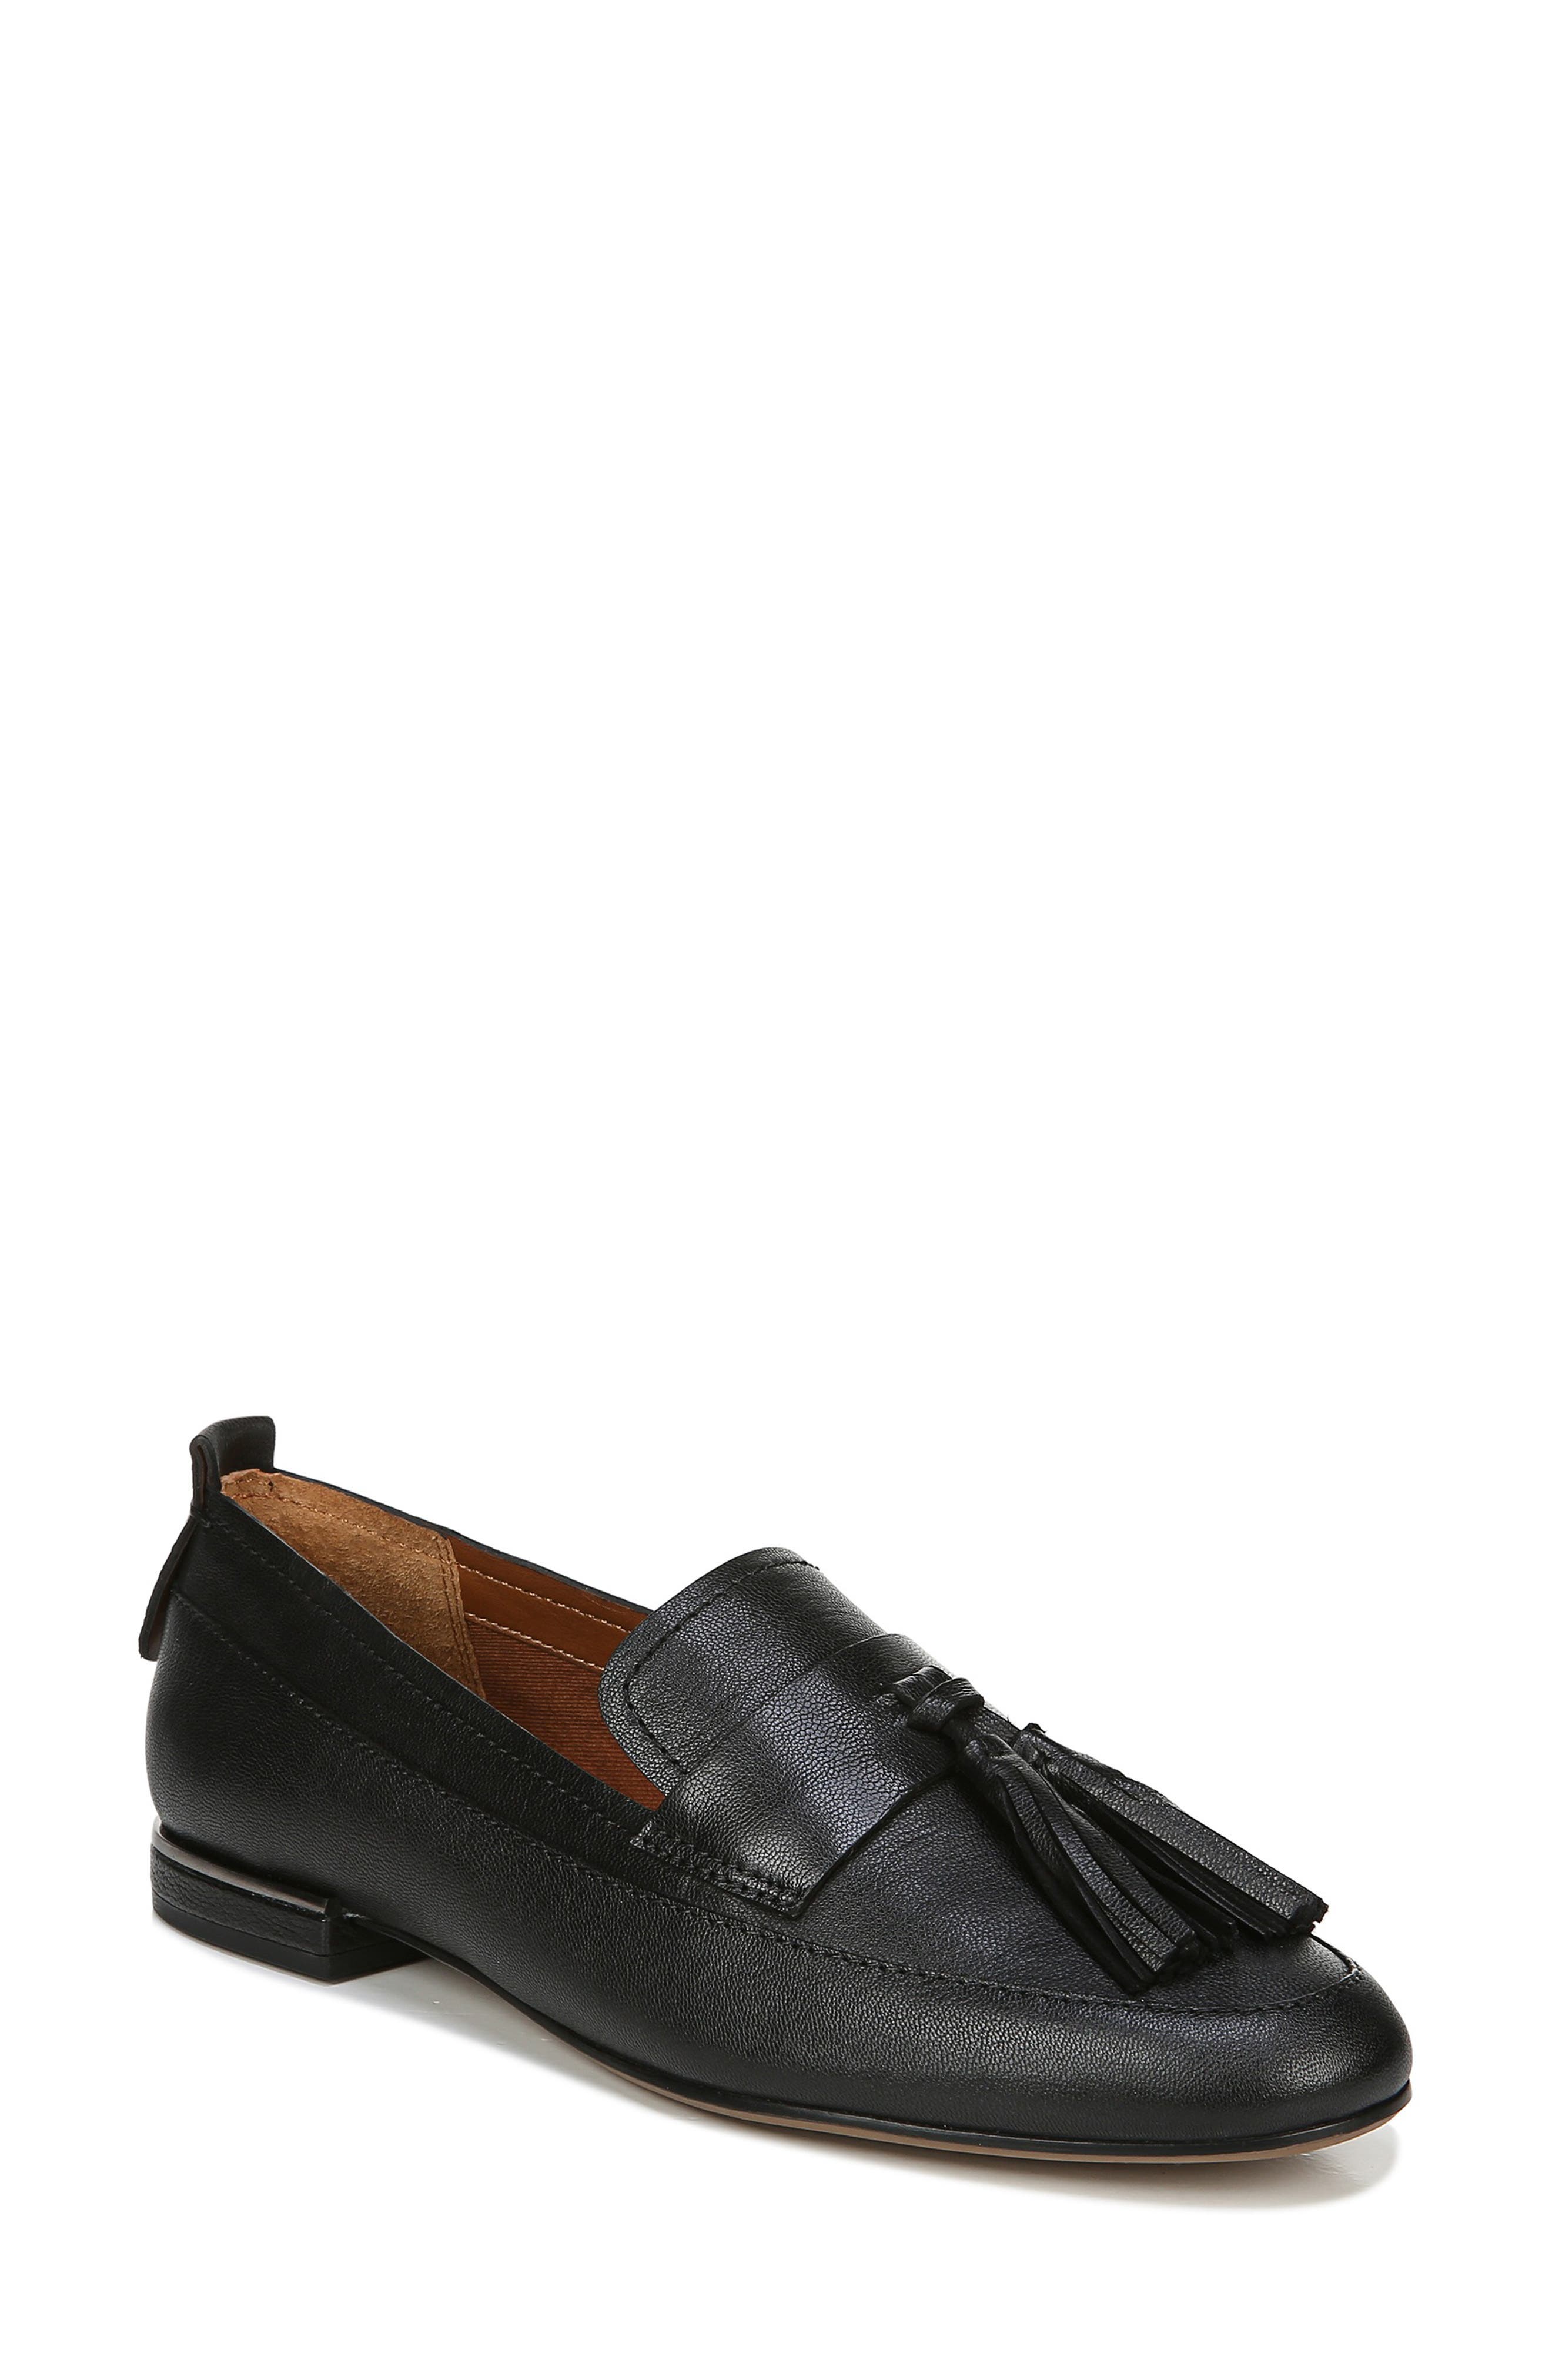 franco sarto abyss loafer